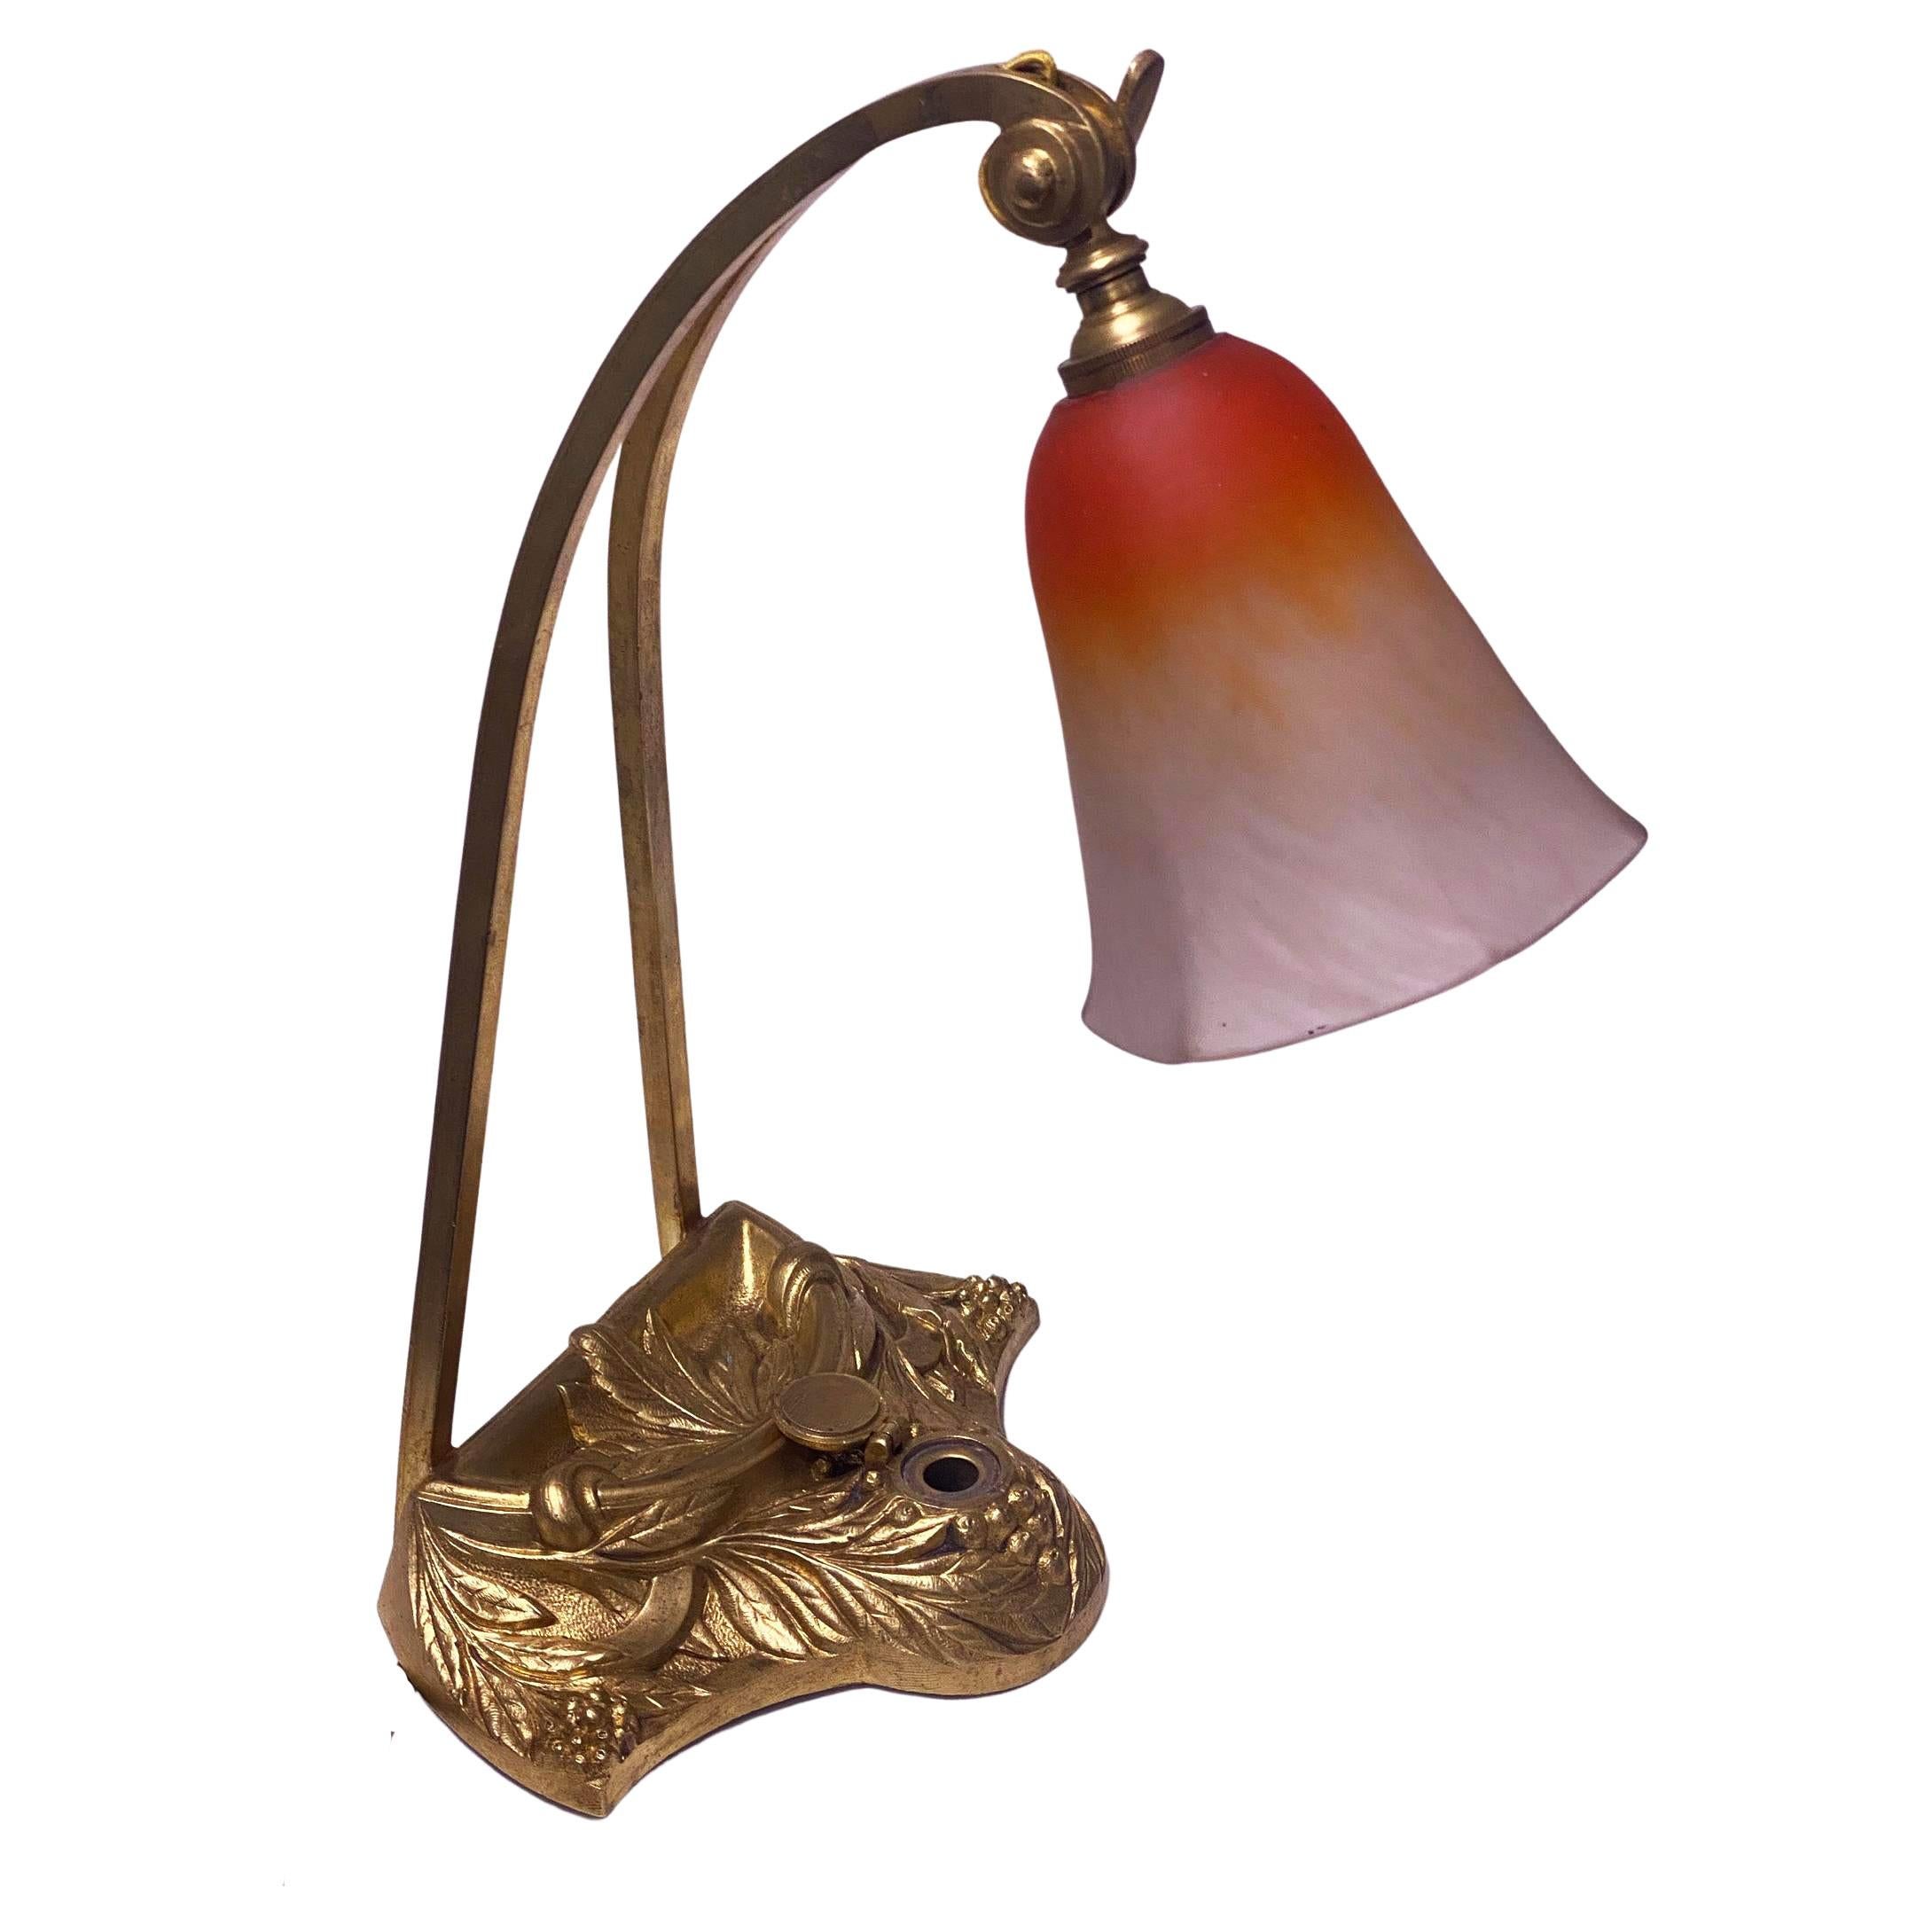 French Art Nouveau Desk Table Lamp by Charles Schneider, C. 1920 In Good Condition For Sale In Toronto, Ontario